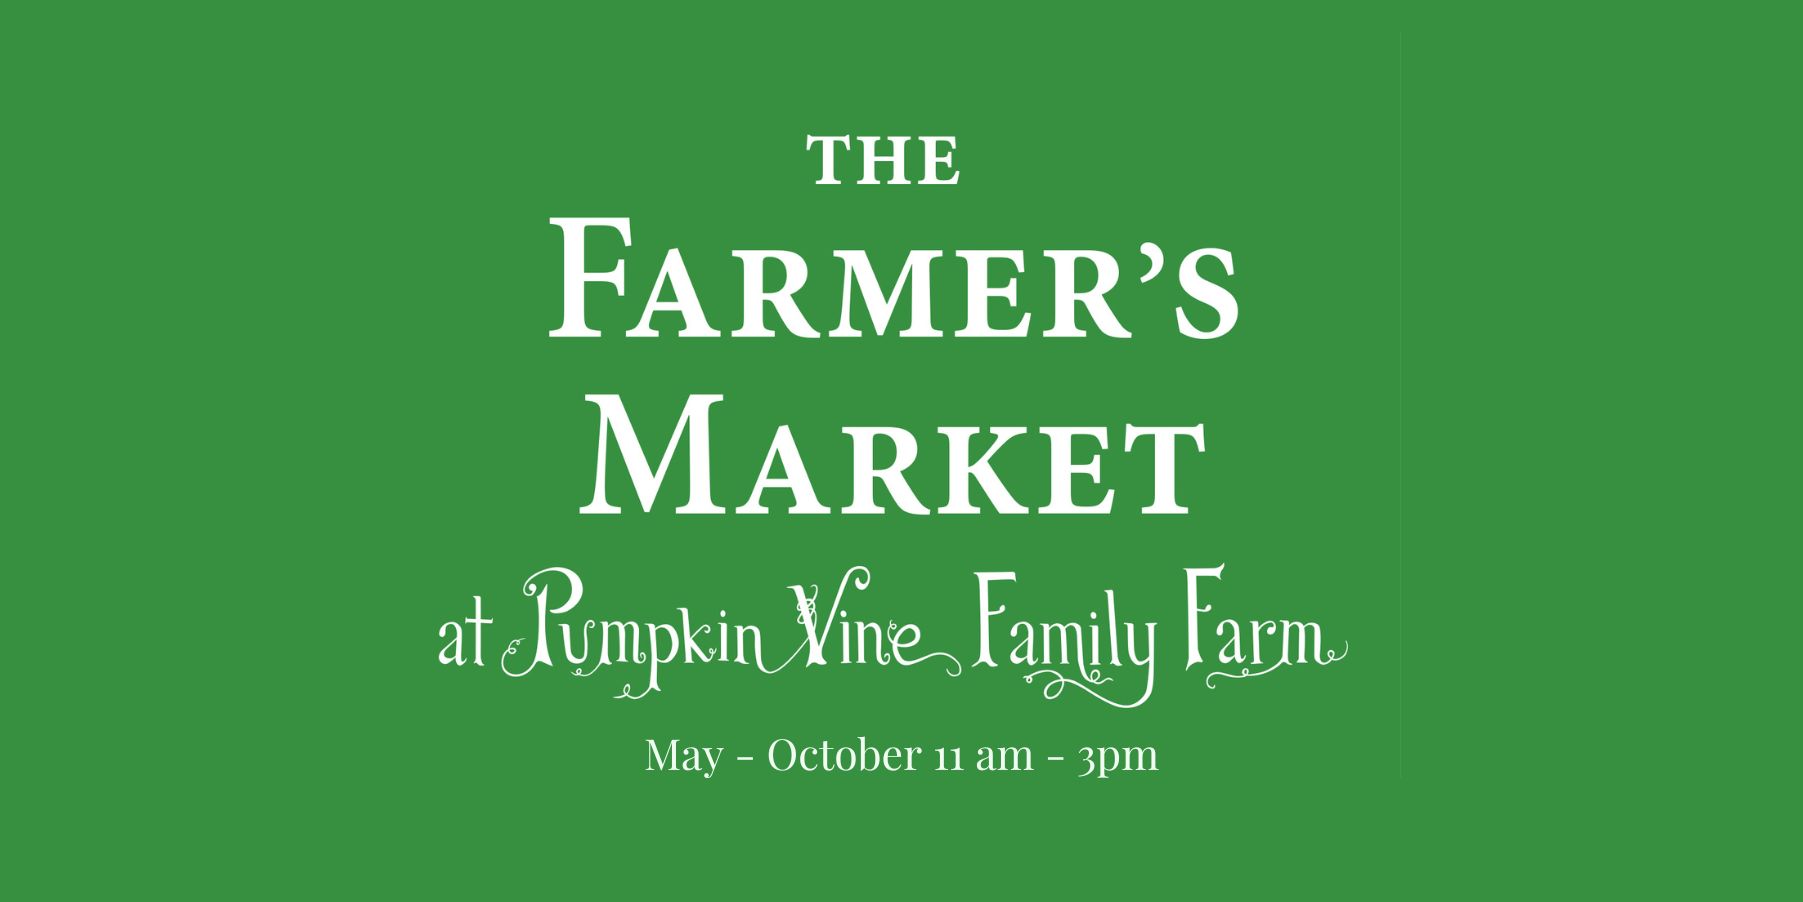 Green Background with words "The Farmer's Market at Pumpkin Vine Family Farm" written in white. Also hours listed as 11-3 May- October.